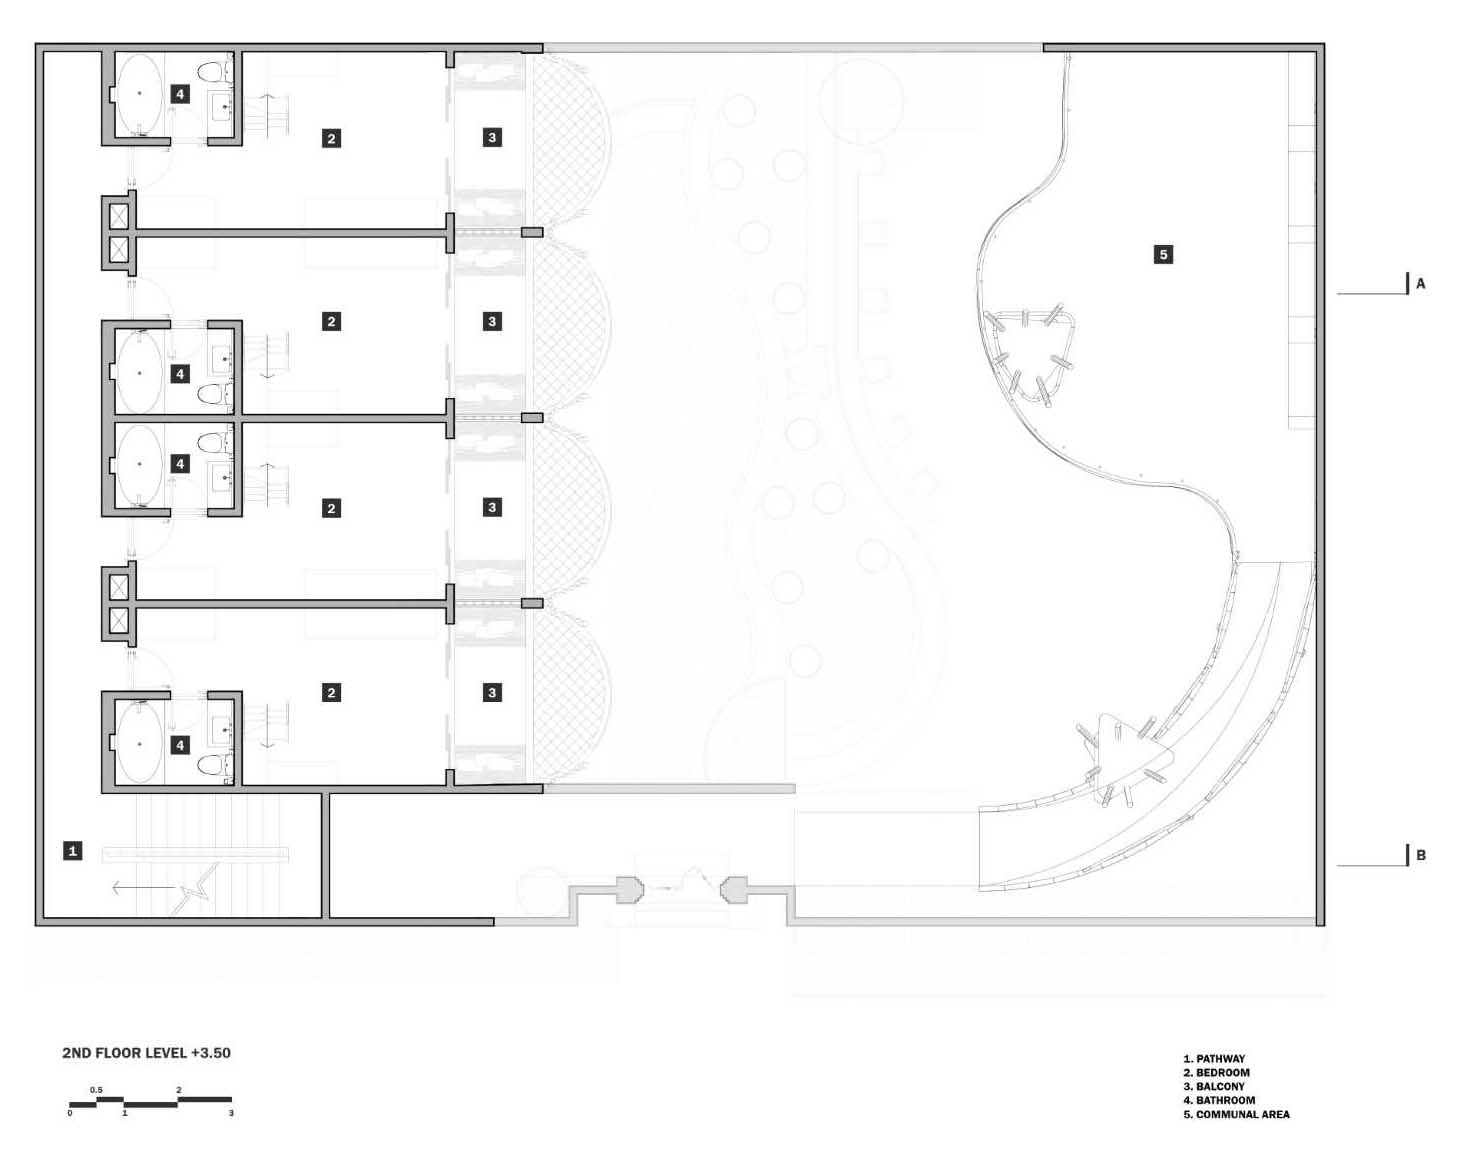 The second floor plan for a micro-living property.